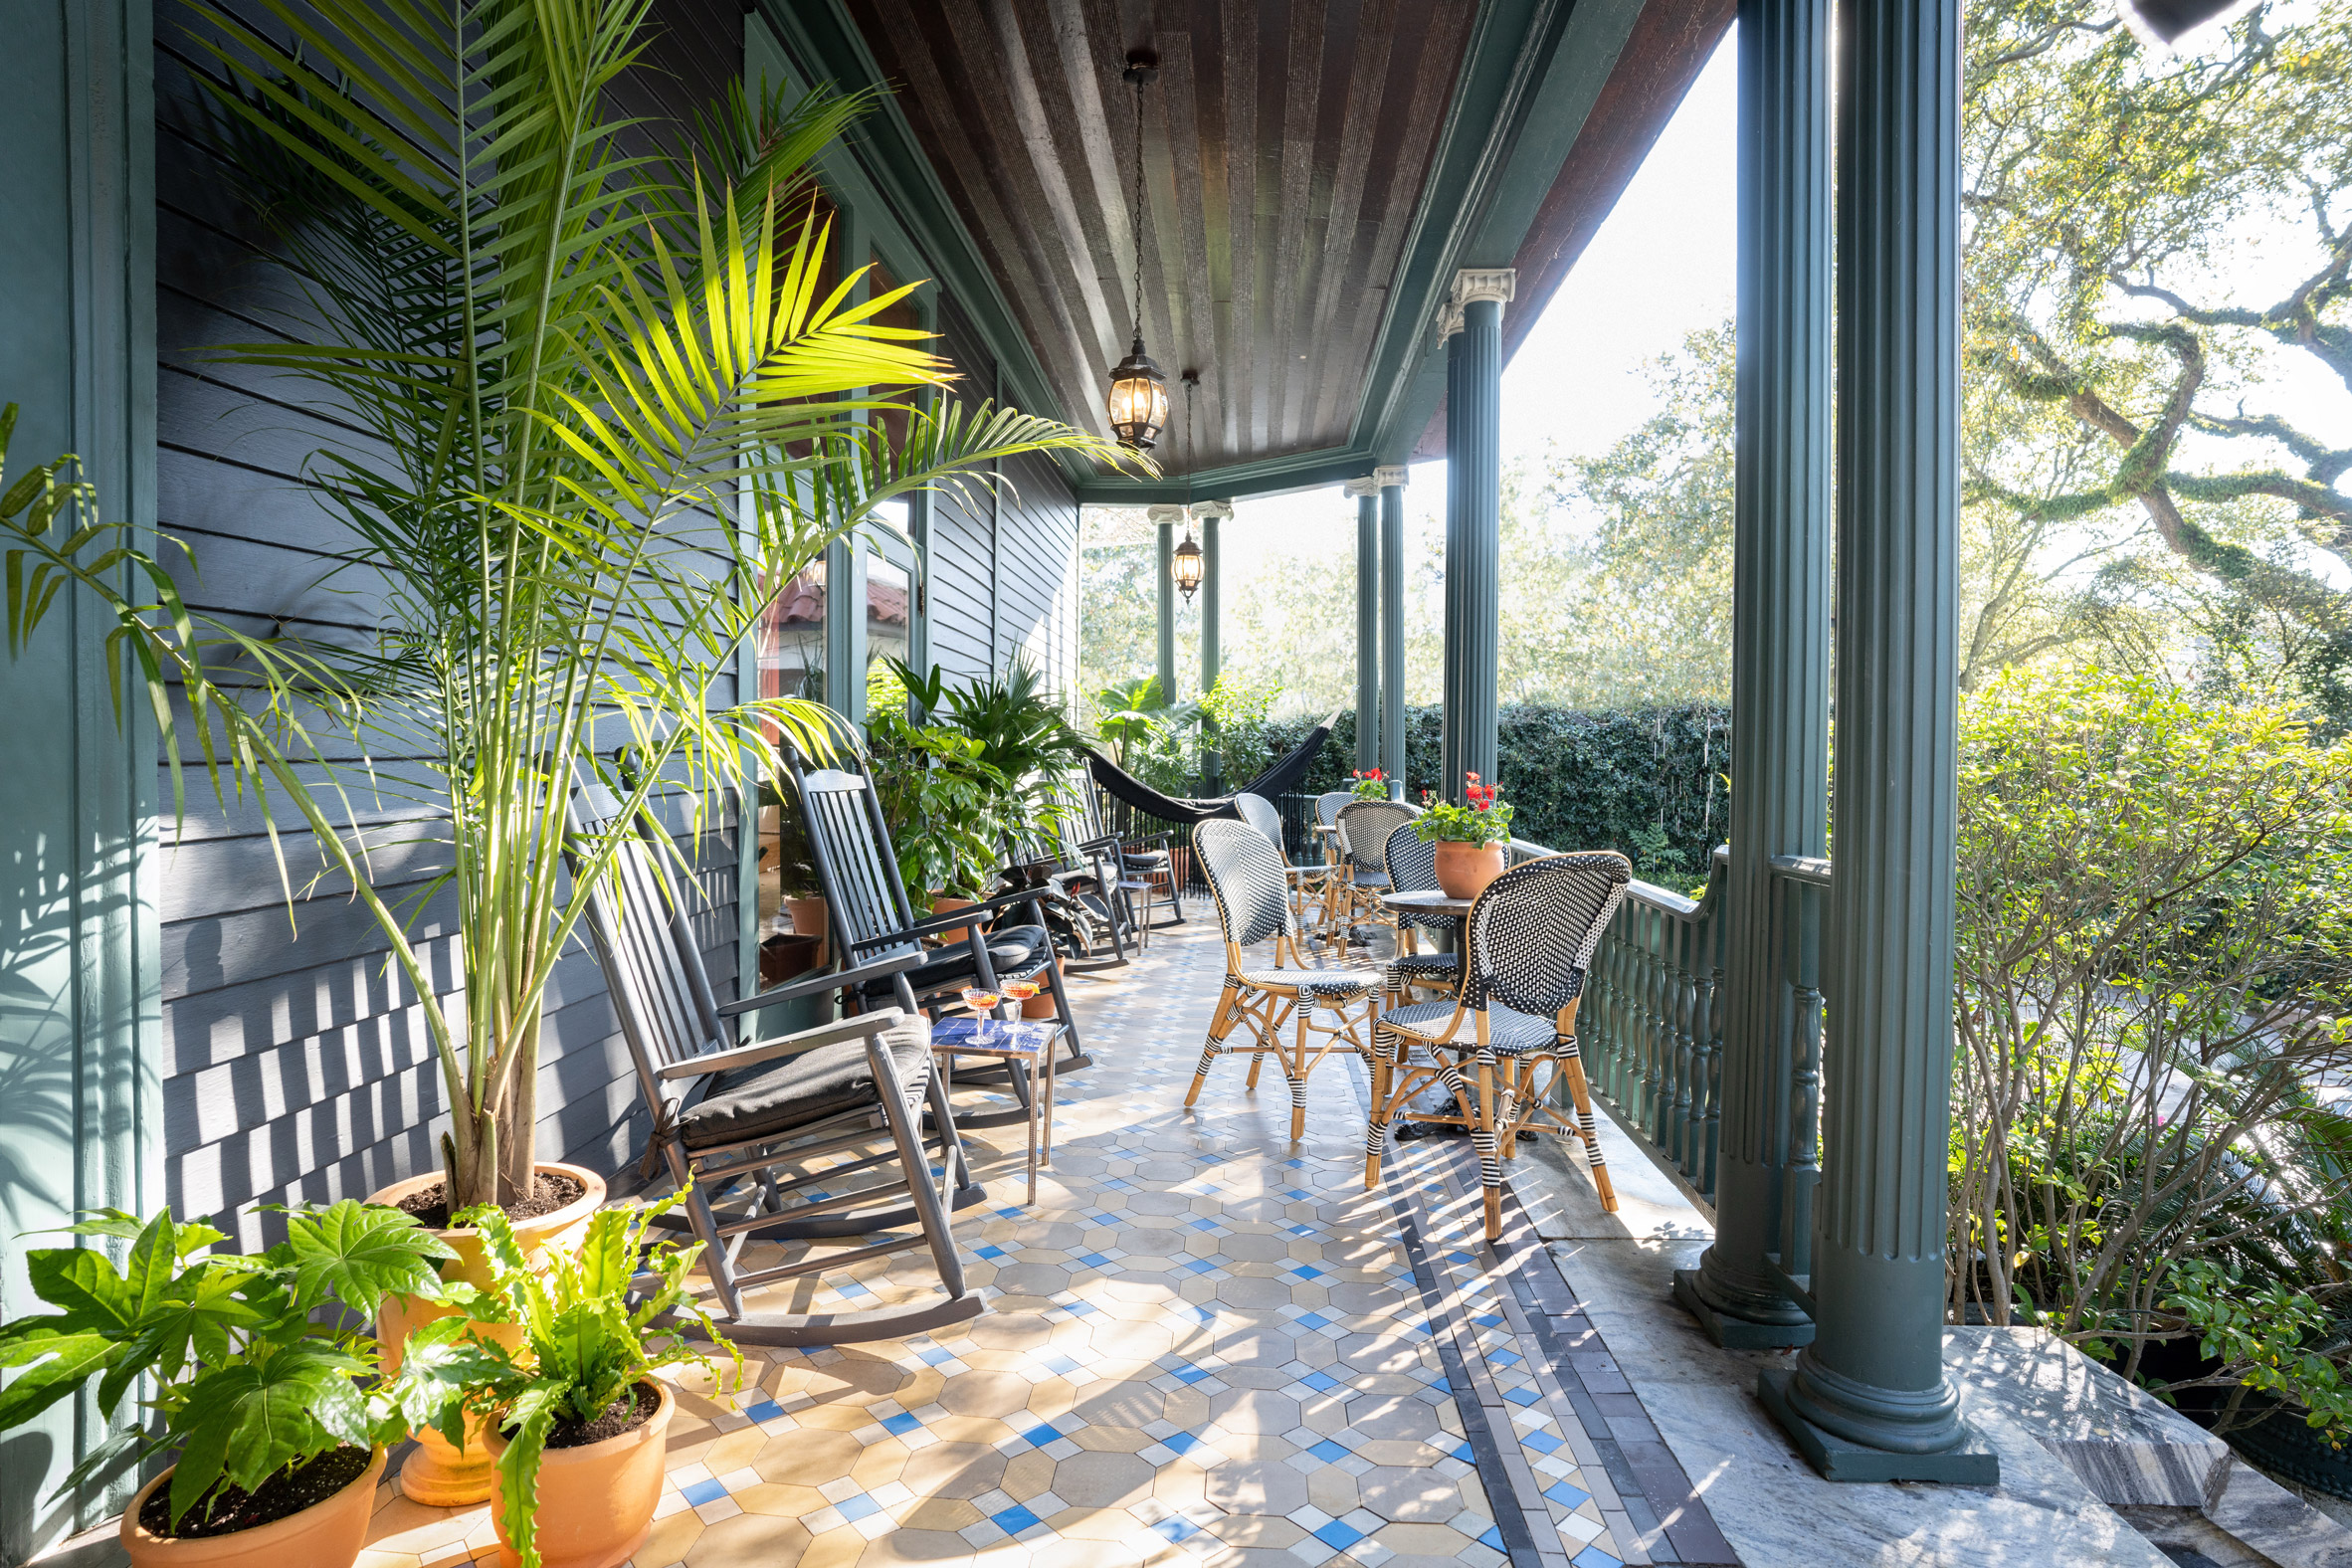 Outdoor patio of The Chloe hotel in New Orleans